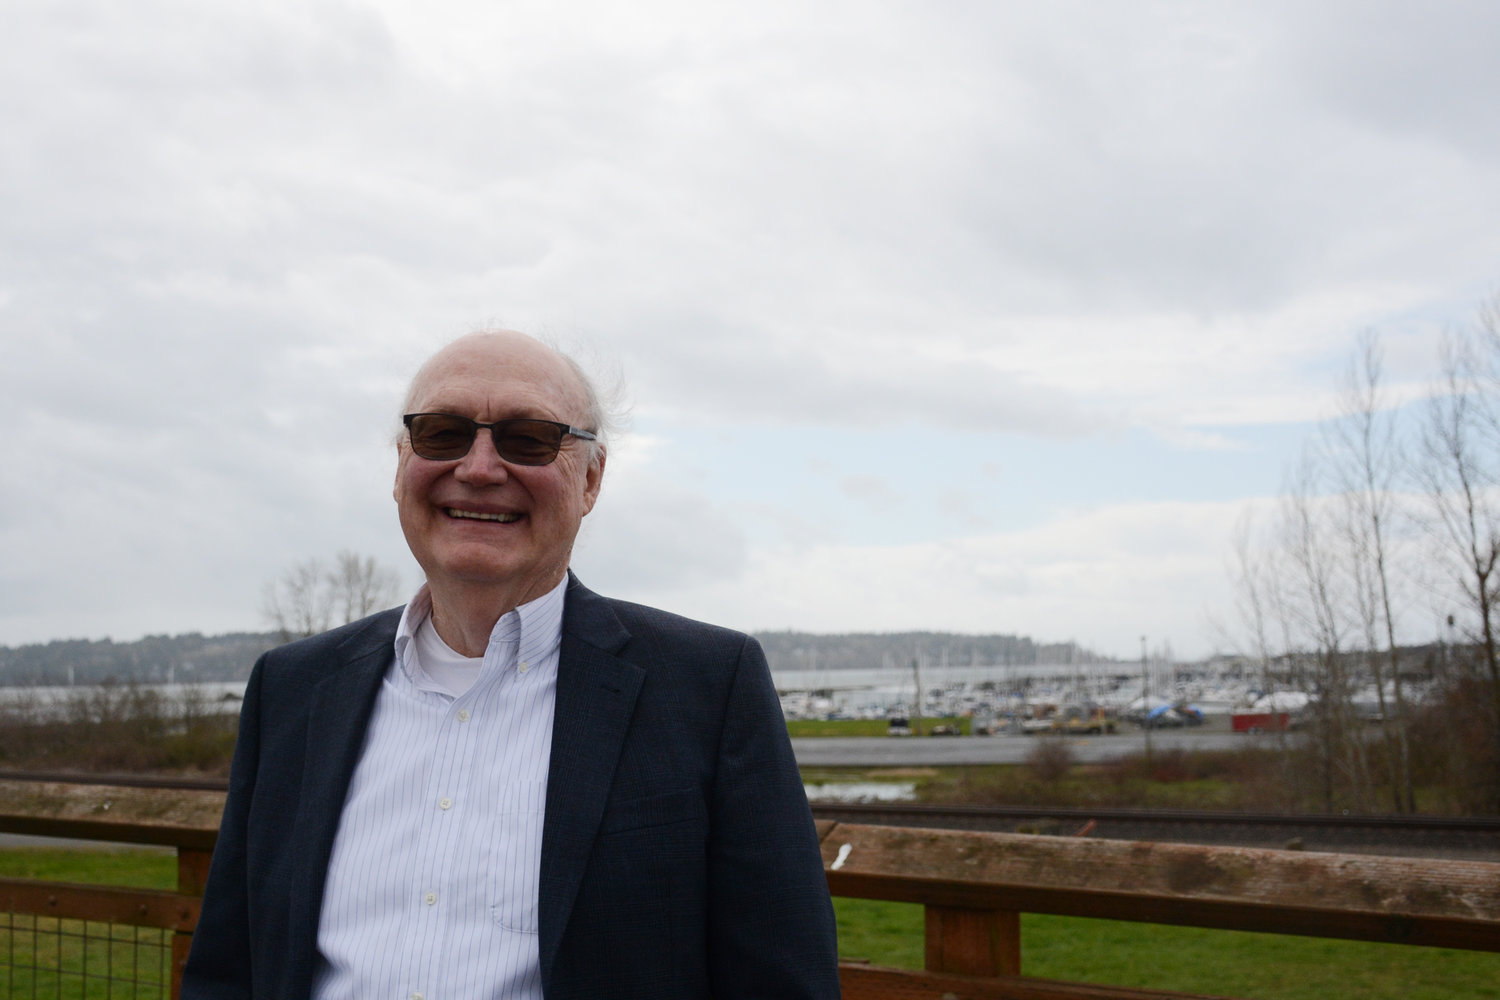 New Blaine school board member Don Leu stands in front of Blaine Harbor. Leu has worked in education for 52 years.